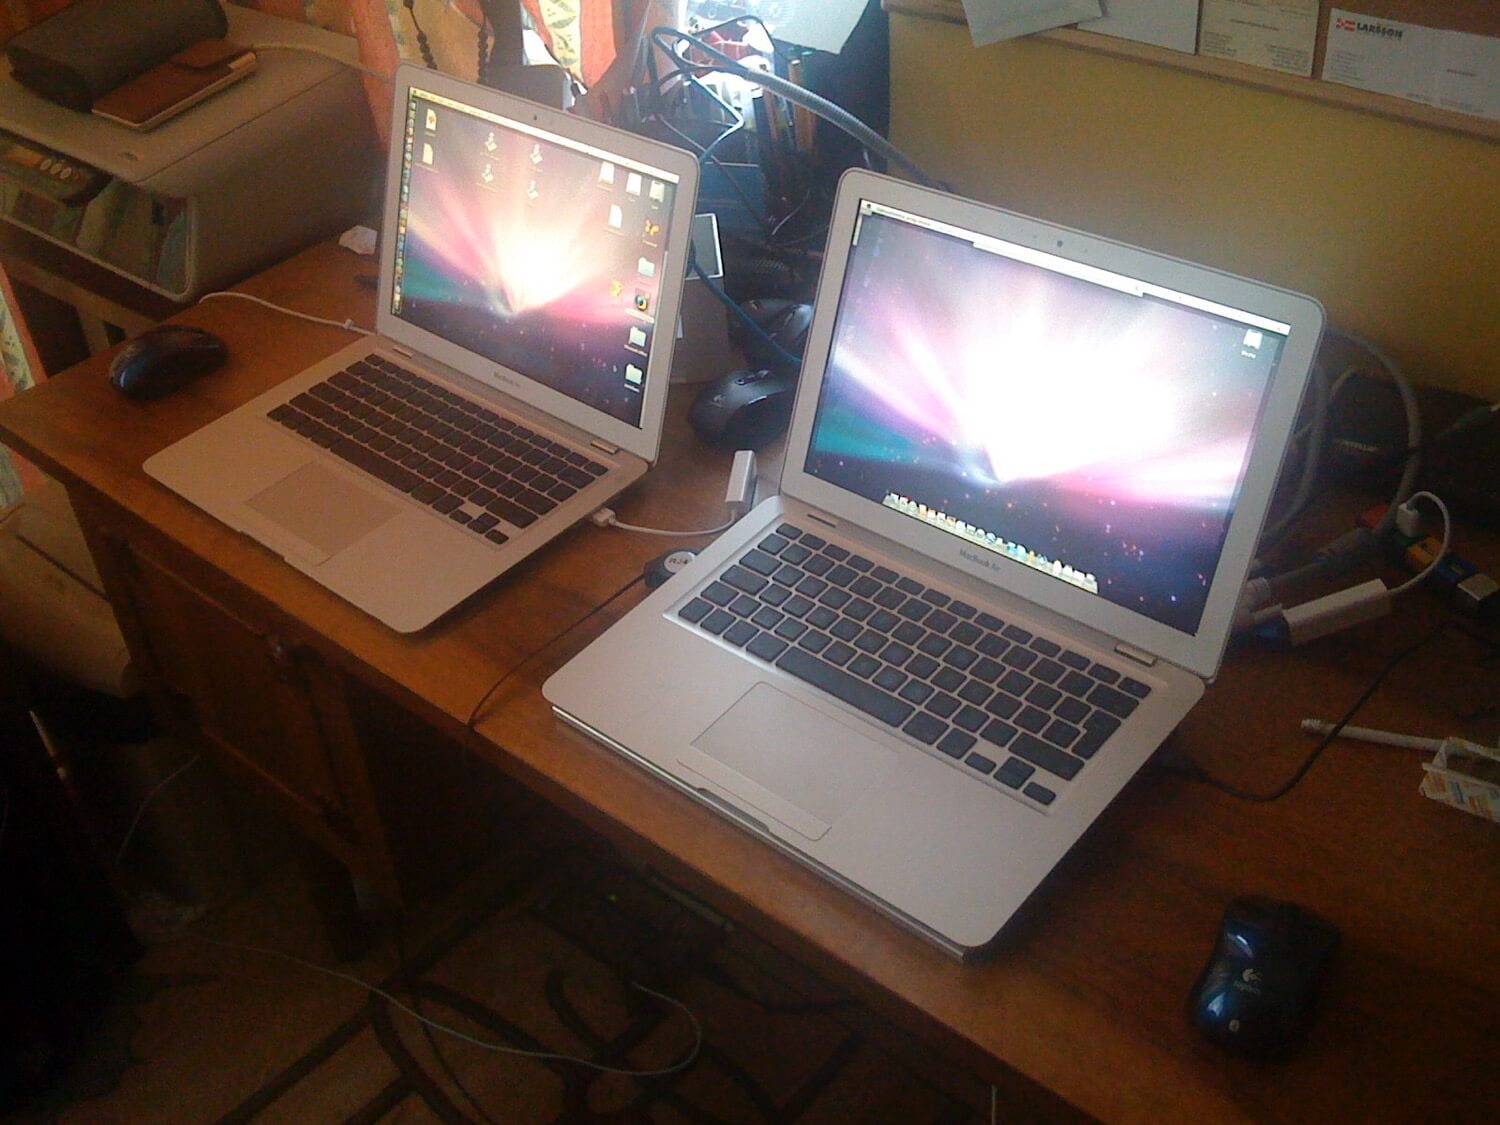 History of my 10 laptops - from 2000 and Compaq, Fujitsu, Toshiba, ThinkPad through 2008 with Apple MacBooks until now! airs